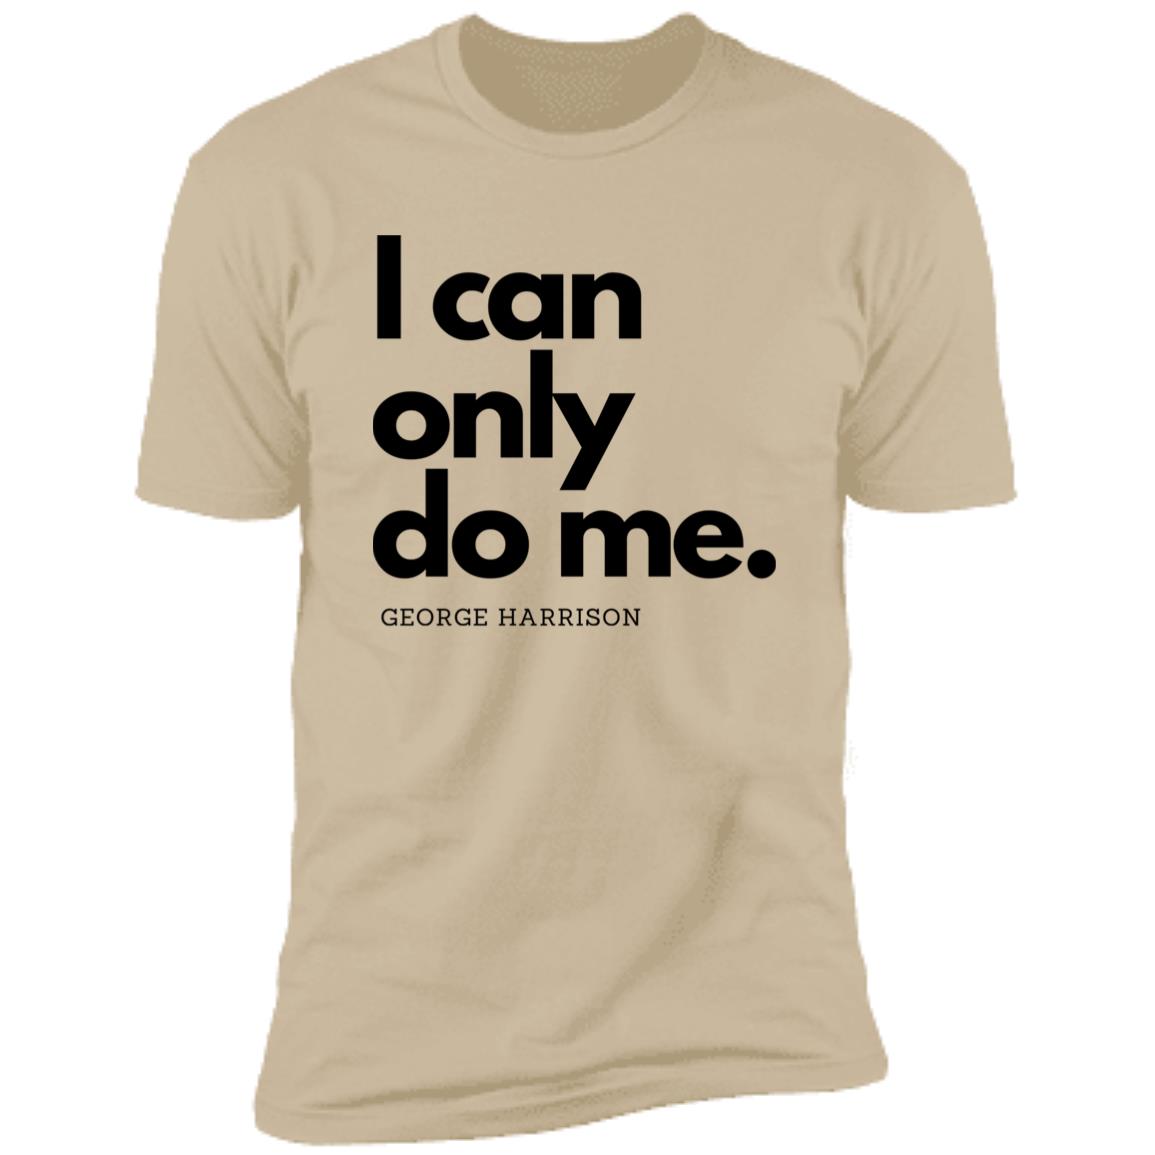 I can only do me. T-Shirt